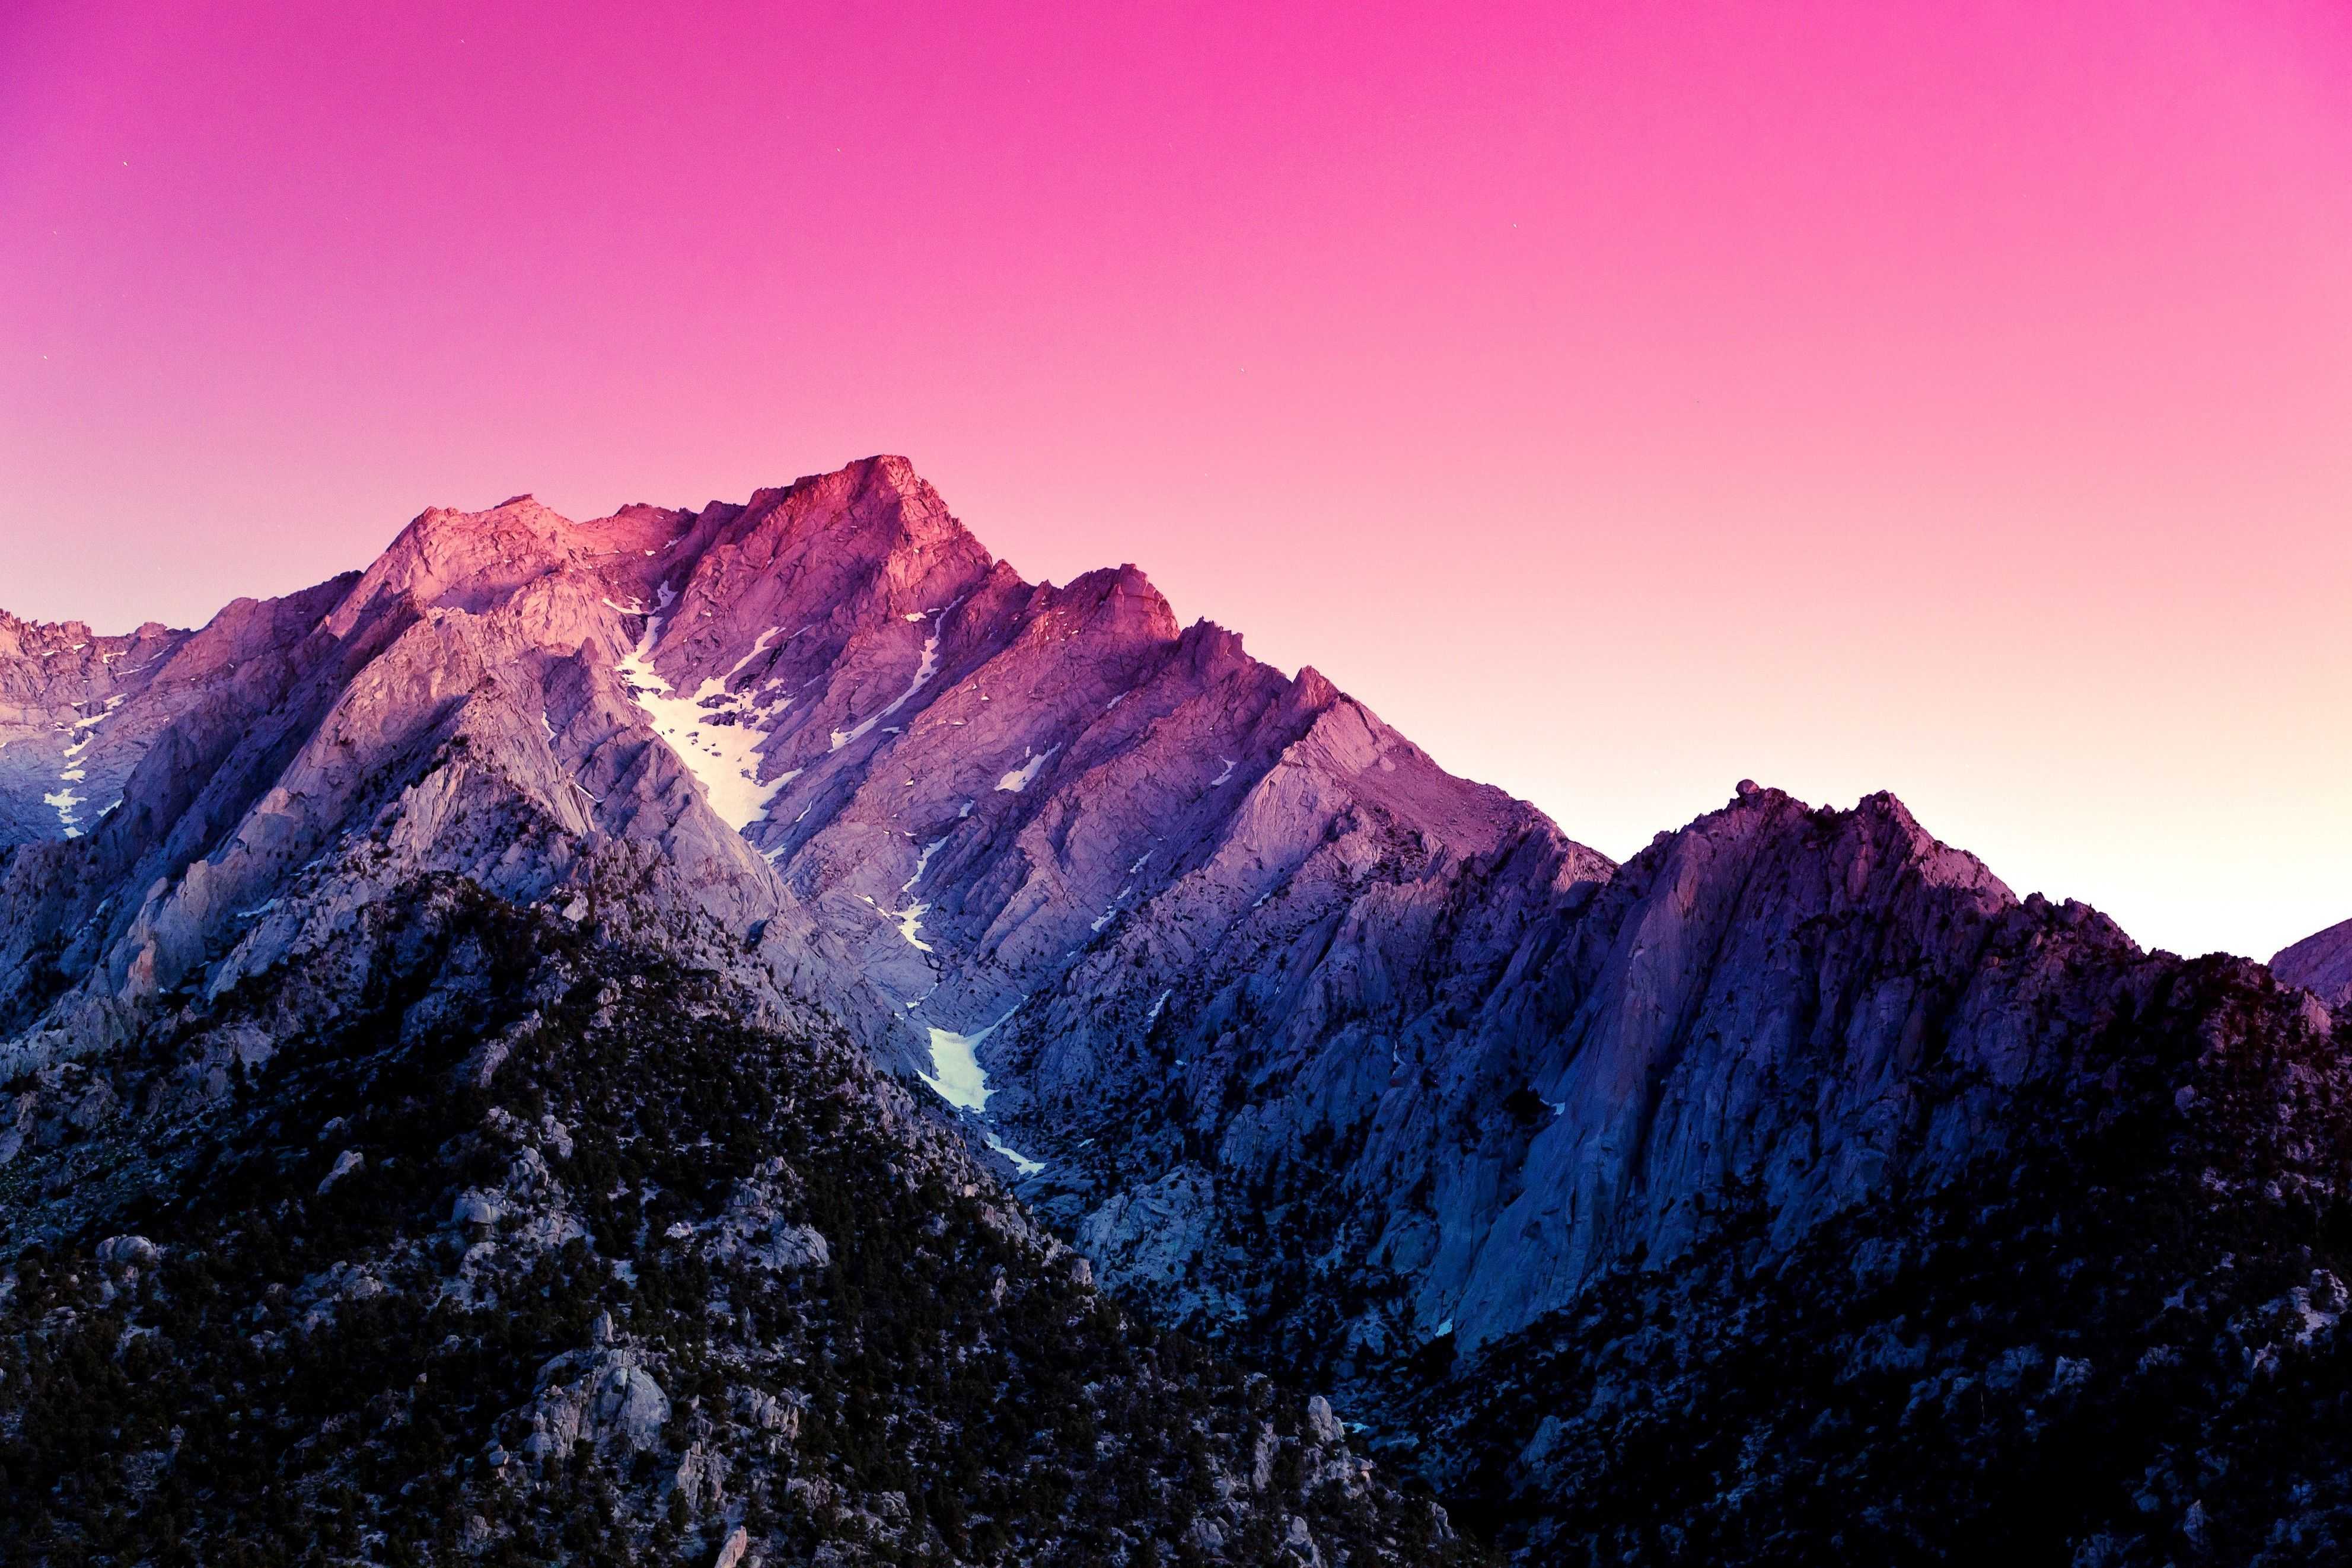 Background image of a mountain.